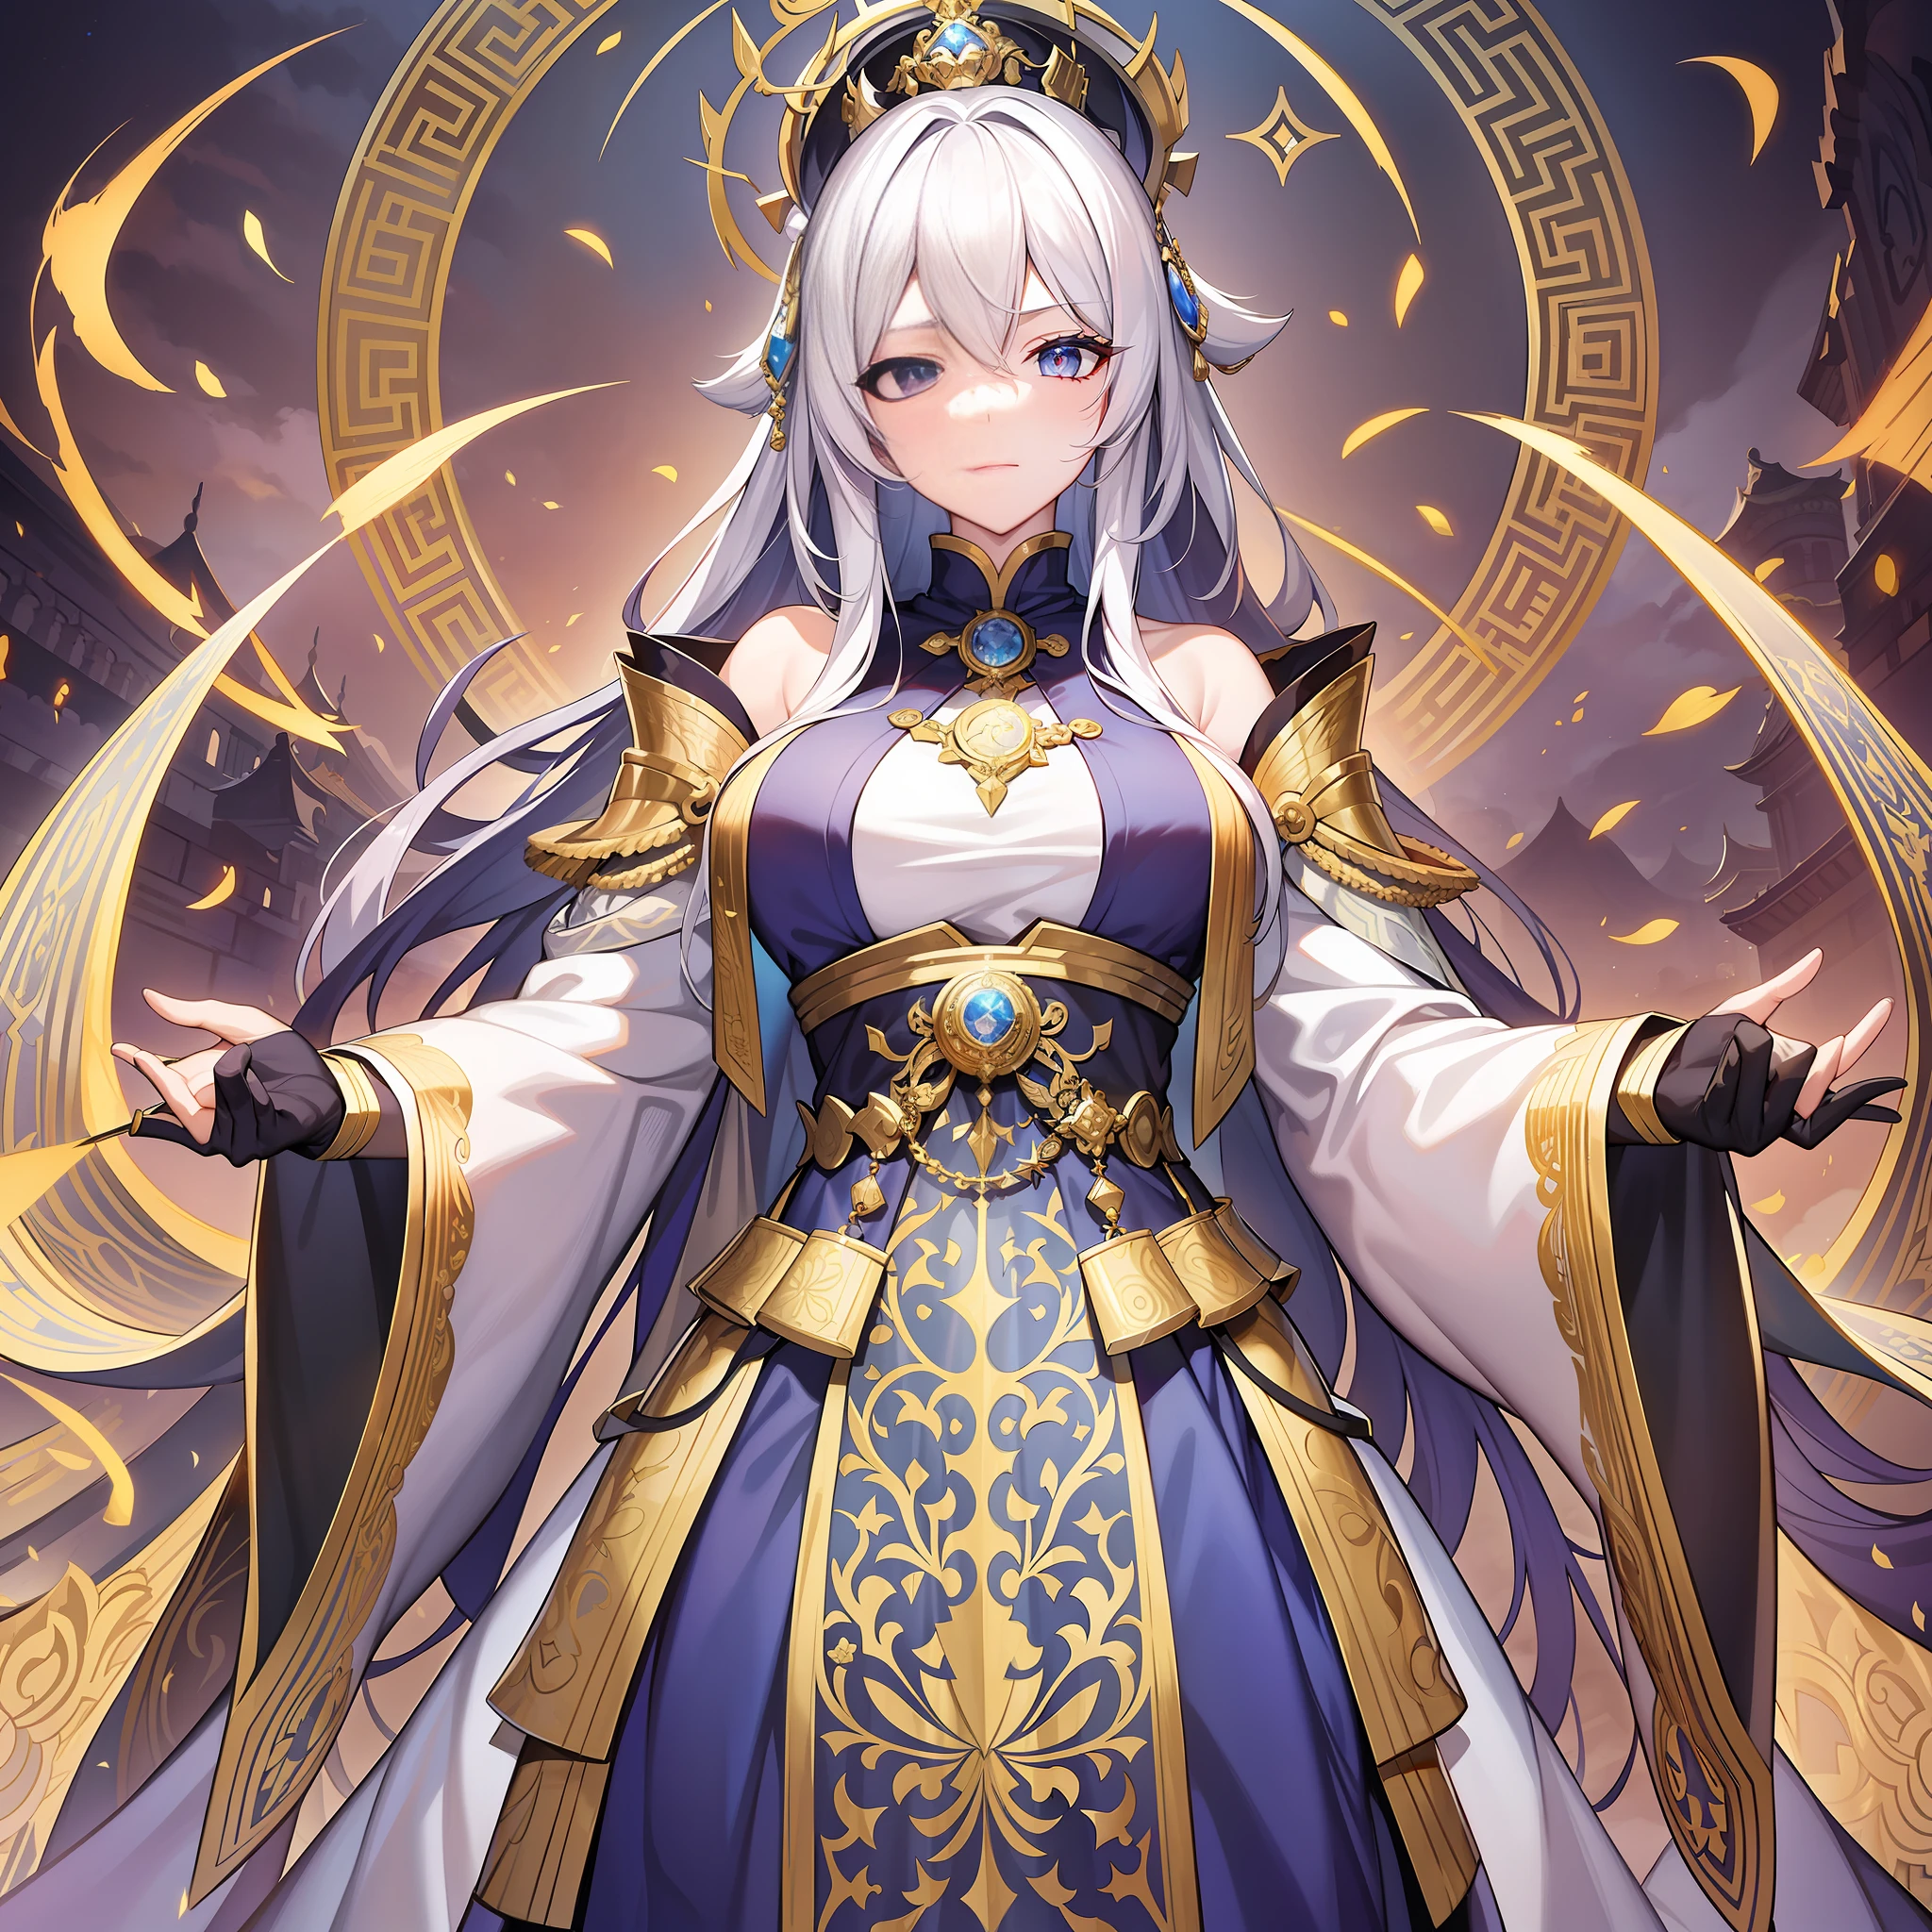 In this imperial city full of majesty and power，A white-haired female emperor of the White Fox Clan who is releasing coercion appears in the center of the picture。

She wore a gorgeous white robe，Crown on head，Holding a magic wand。Her gaze was fierce，In the air behind her，Condensed a burst of breath that could be released。

The color tone of the whole picture is mainly white and gold，Highlight the majesty and nobility of the female emperor。The background is a magnificent and ornate palace，It looks solemn and solemn。

The female emperor saw through her expression and unsettling breath，It shows her dominance and powerful domineering。Her gaze swept around the palace，As if to warn those who want to resist。Her clothes and crown show her status and power，It also highlights her confidence and pride。

The whole picture is full of a kind of majesty and domineering，Convey the power and dominance of the female emperor。Her gesture and breath，Show an inviolable force，Feel awe and reverence。At the same time，This picture also shows a magnificent and solemn atmosphere，It conveys the dignity and power that a ruler deserves。